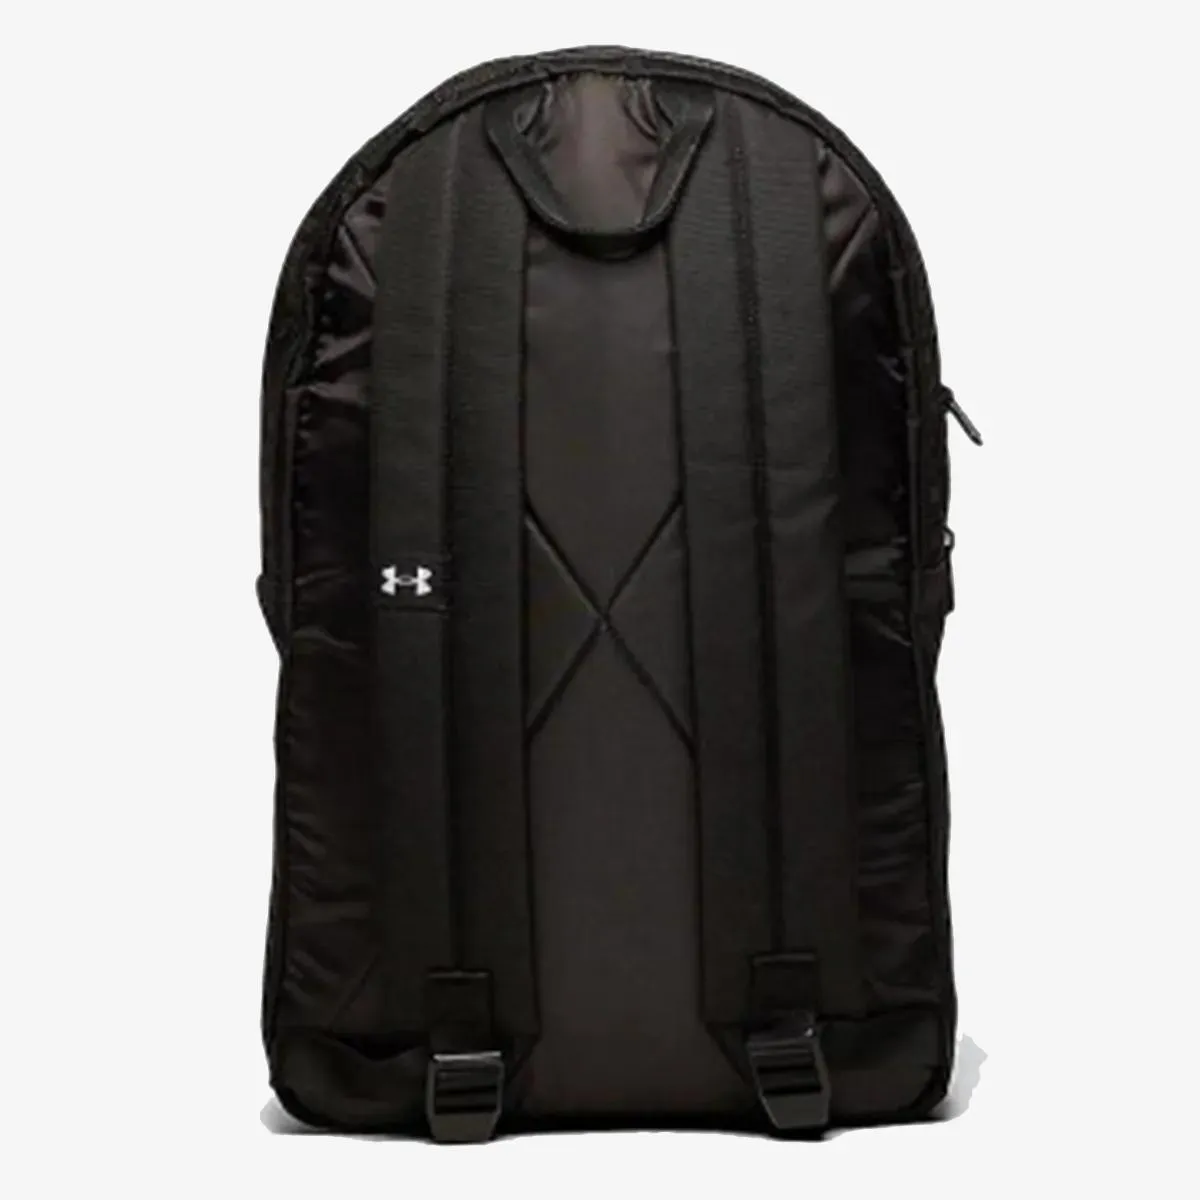 Under Armour Loudon Lite Backpack 